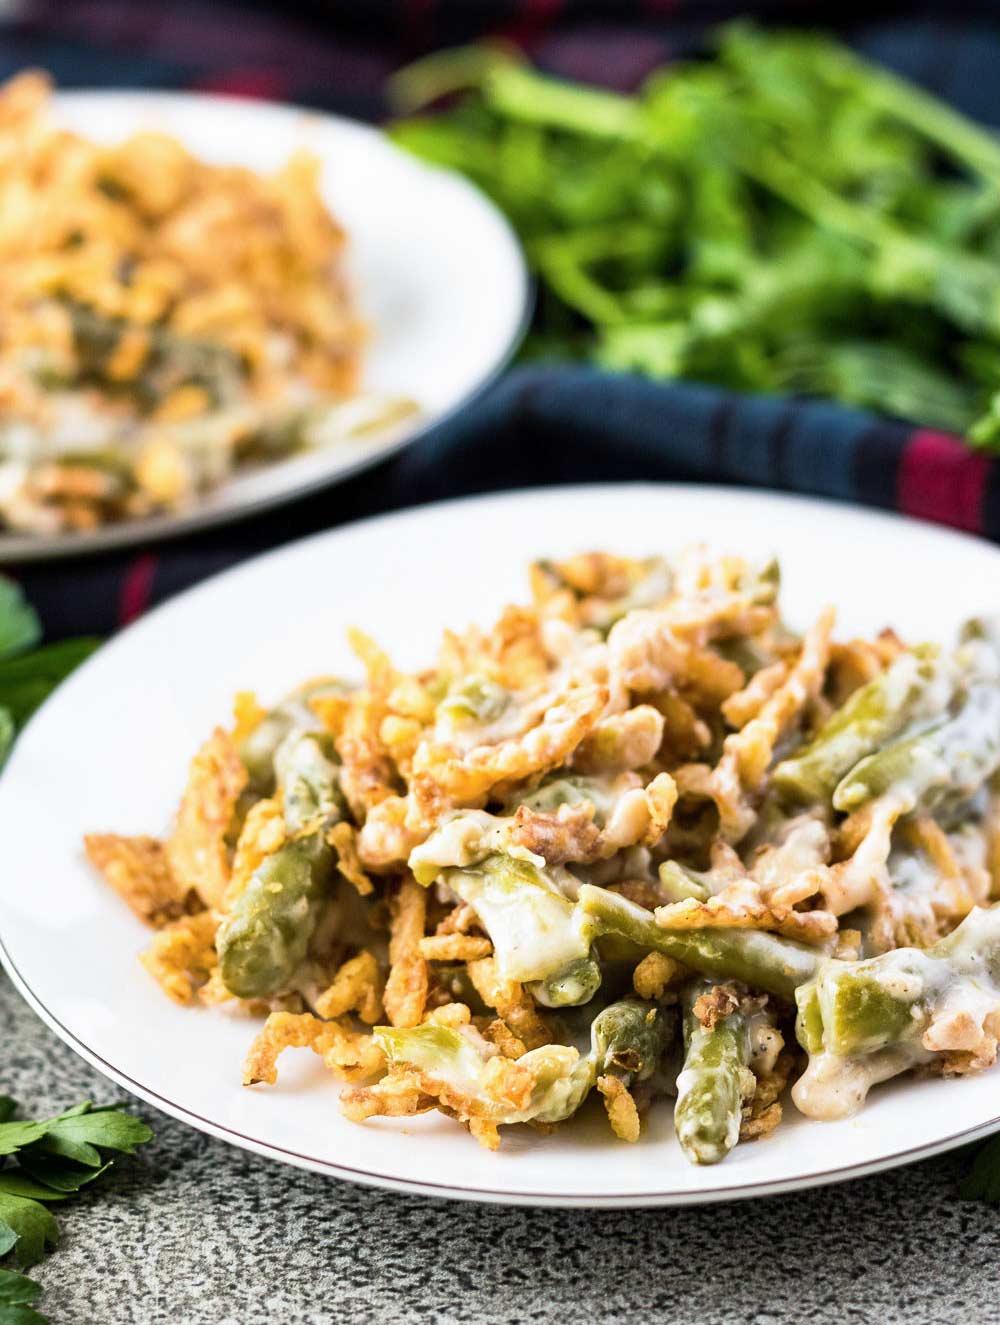 Classic Green Bean Casserole (holiday side dish!) - The Chunky Chef